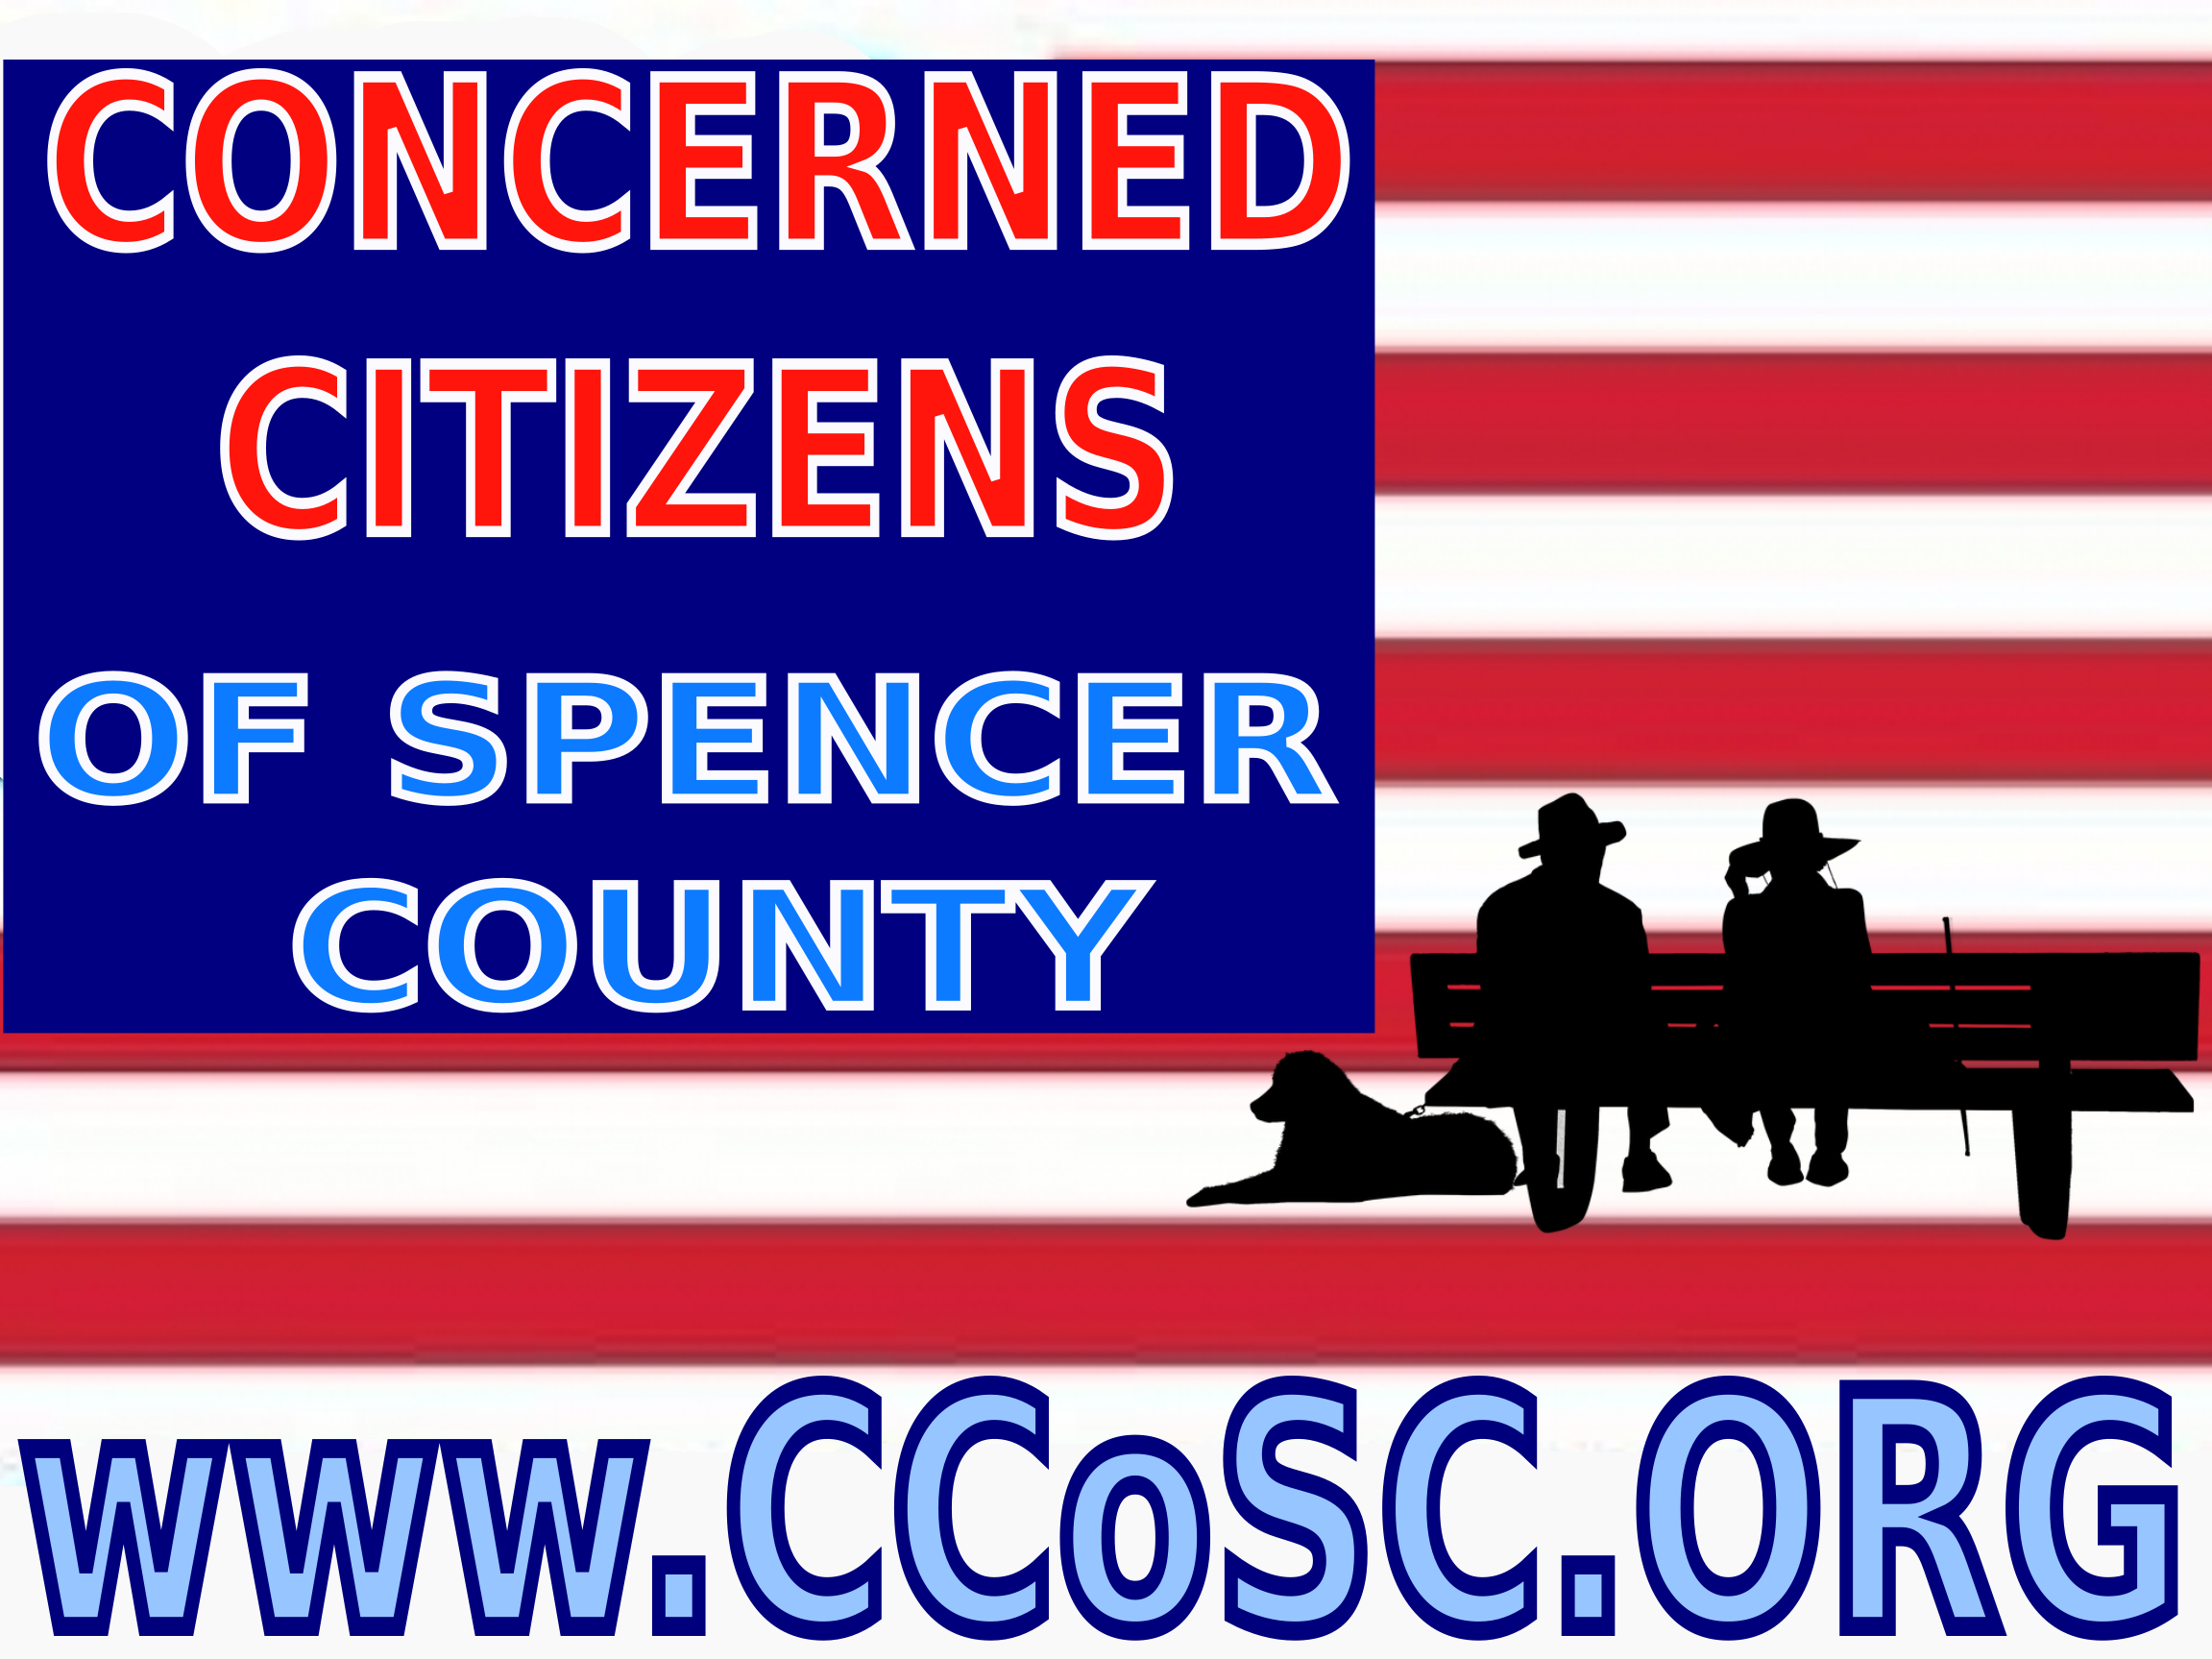 Concerned Citizens of Spencer County